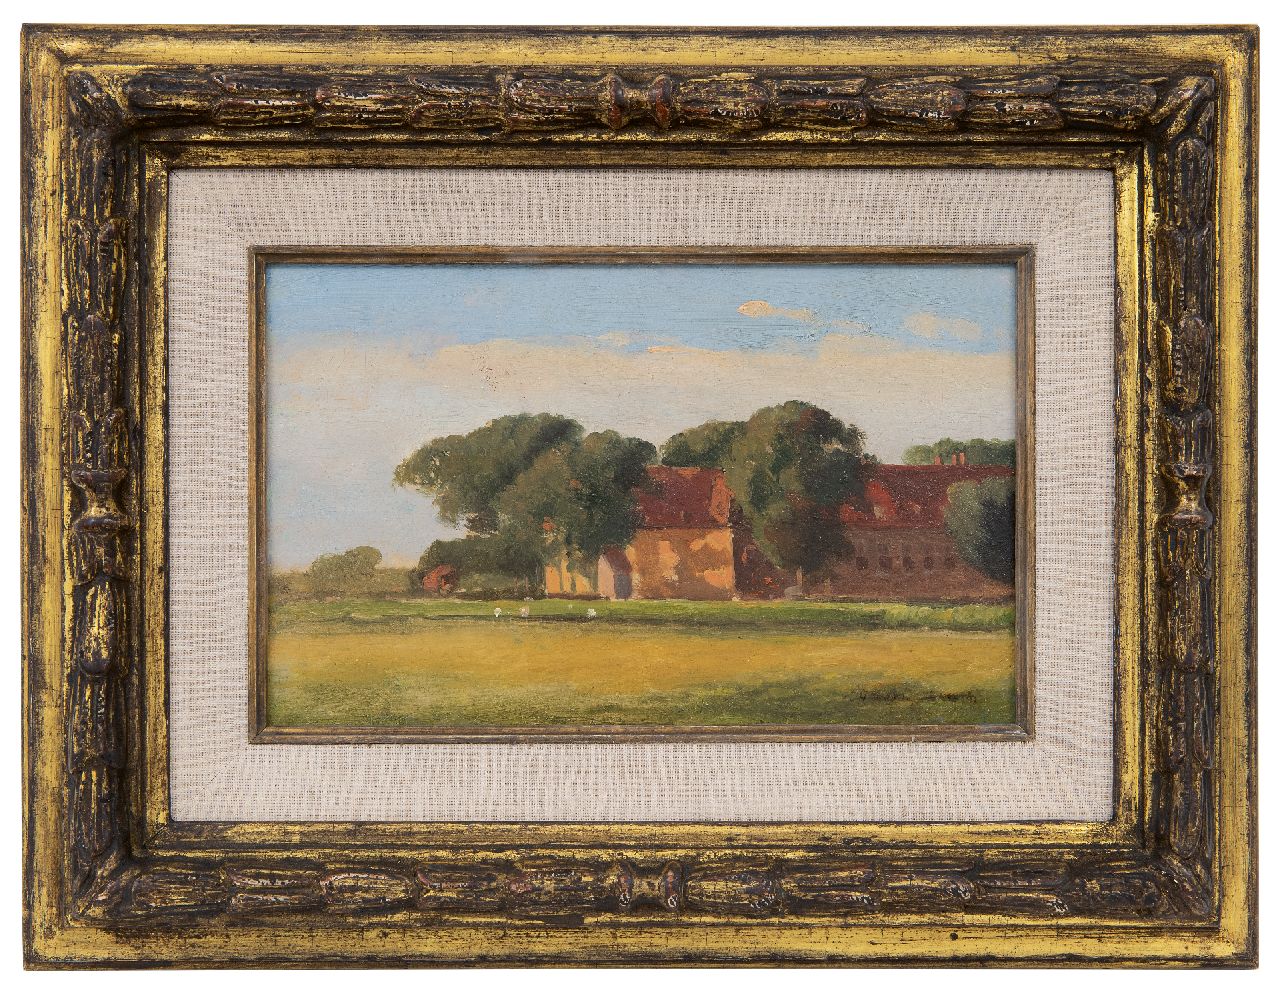 Weissenbruch H.J.  | Hendrik Johannes 'J.H.' Weissenbruch | Paintings offered for sale | Landscape, oil on painter's board 17.9 x 28.3 cm, signed l.r.